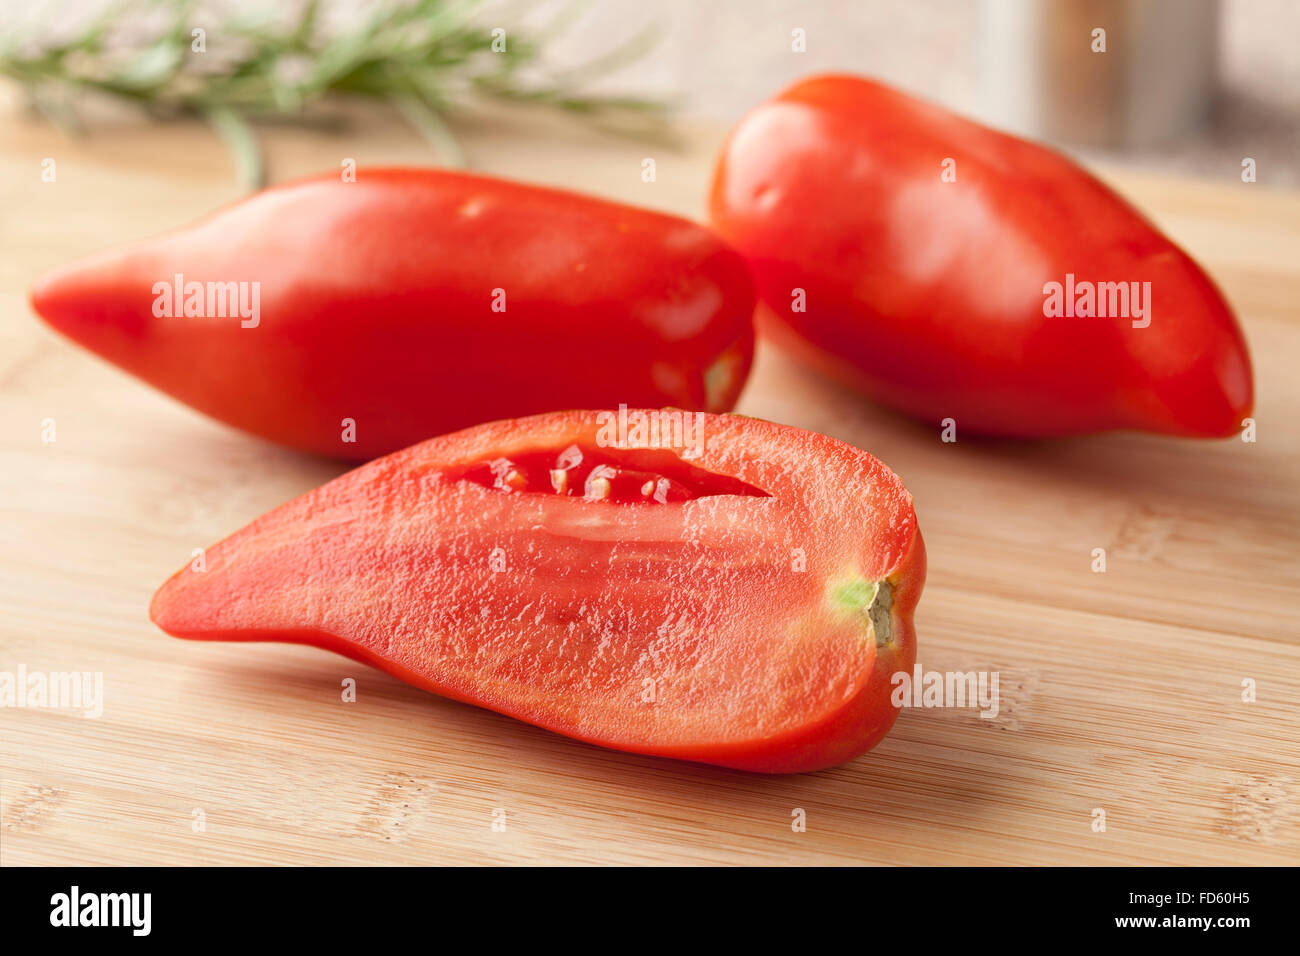 Whole and half fresh Cornue des Andes tomatoes Stock Photo